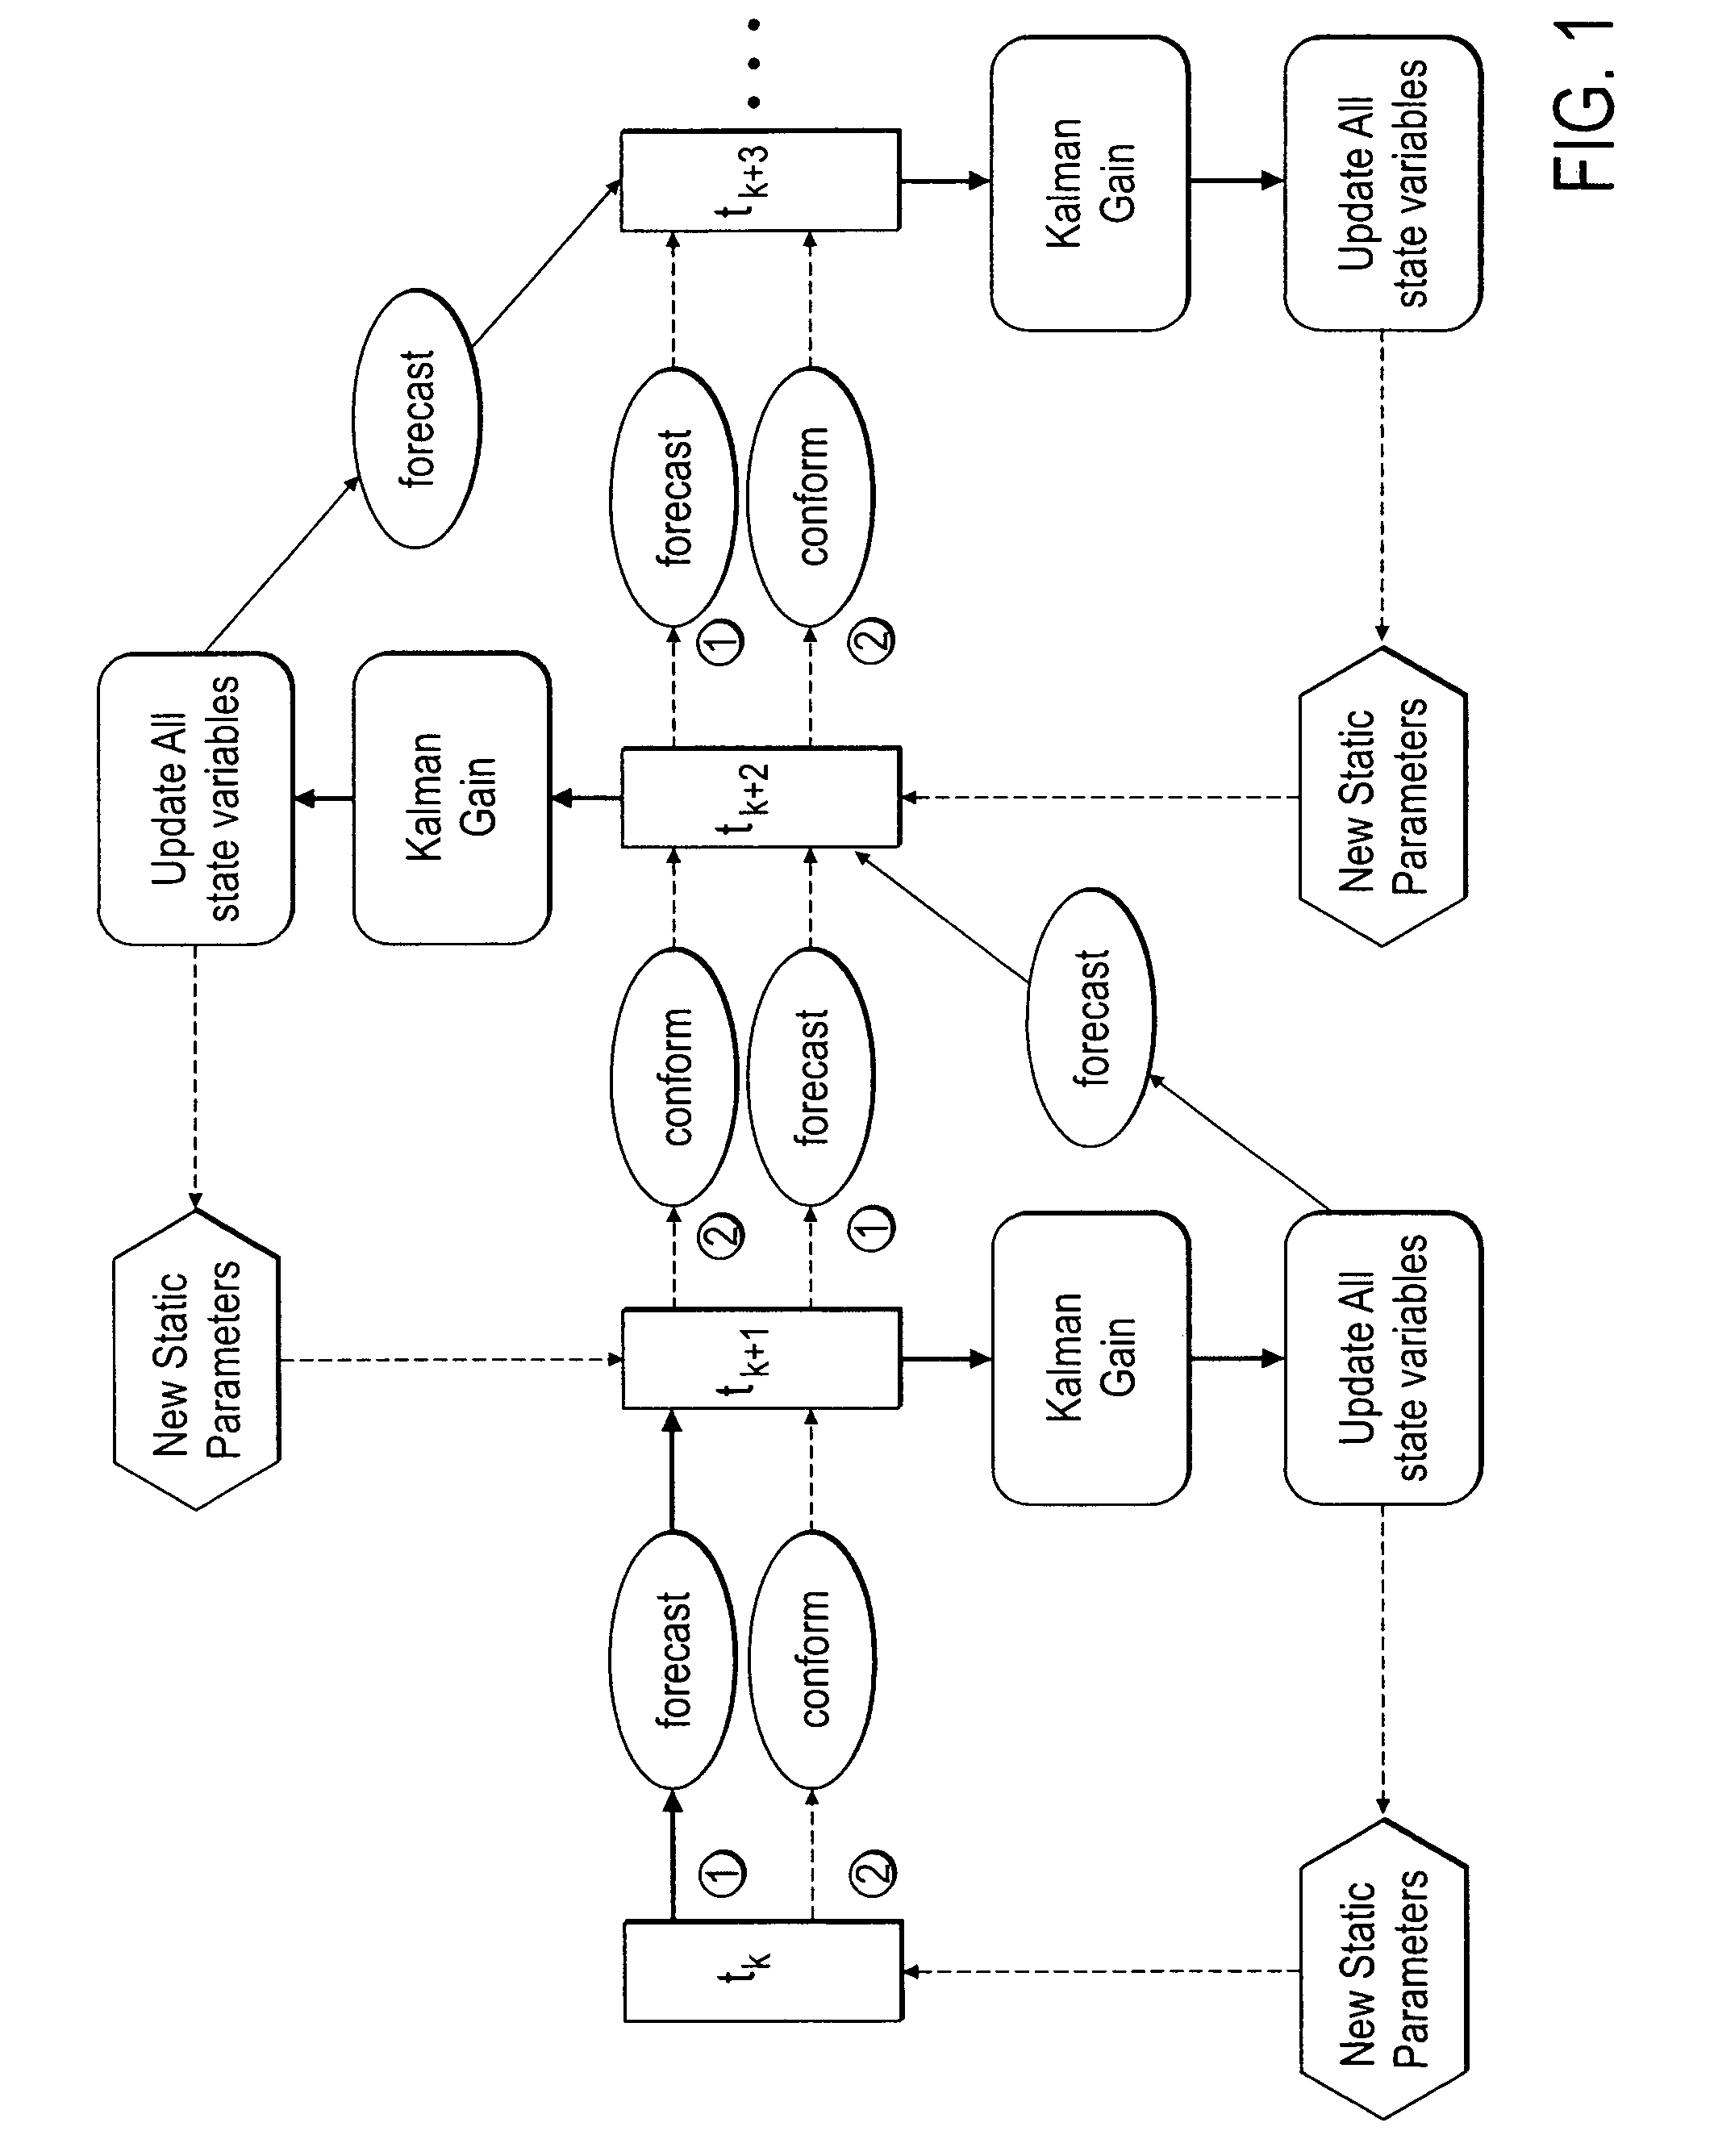 Method, system and apparatus for real-time reservoir model updating using ensemble kalman filter